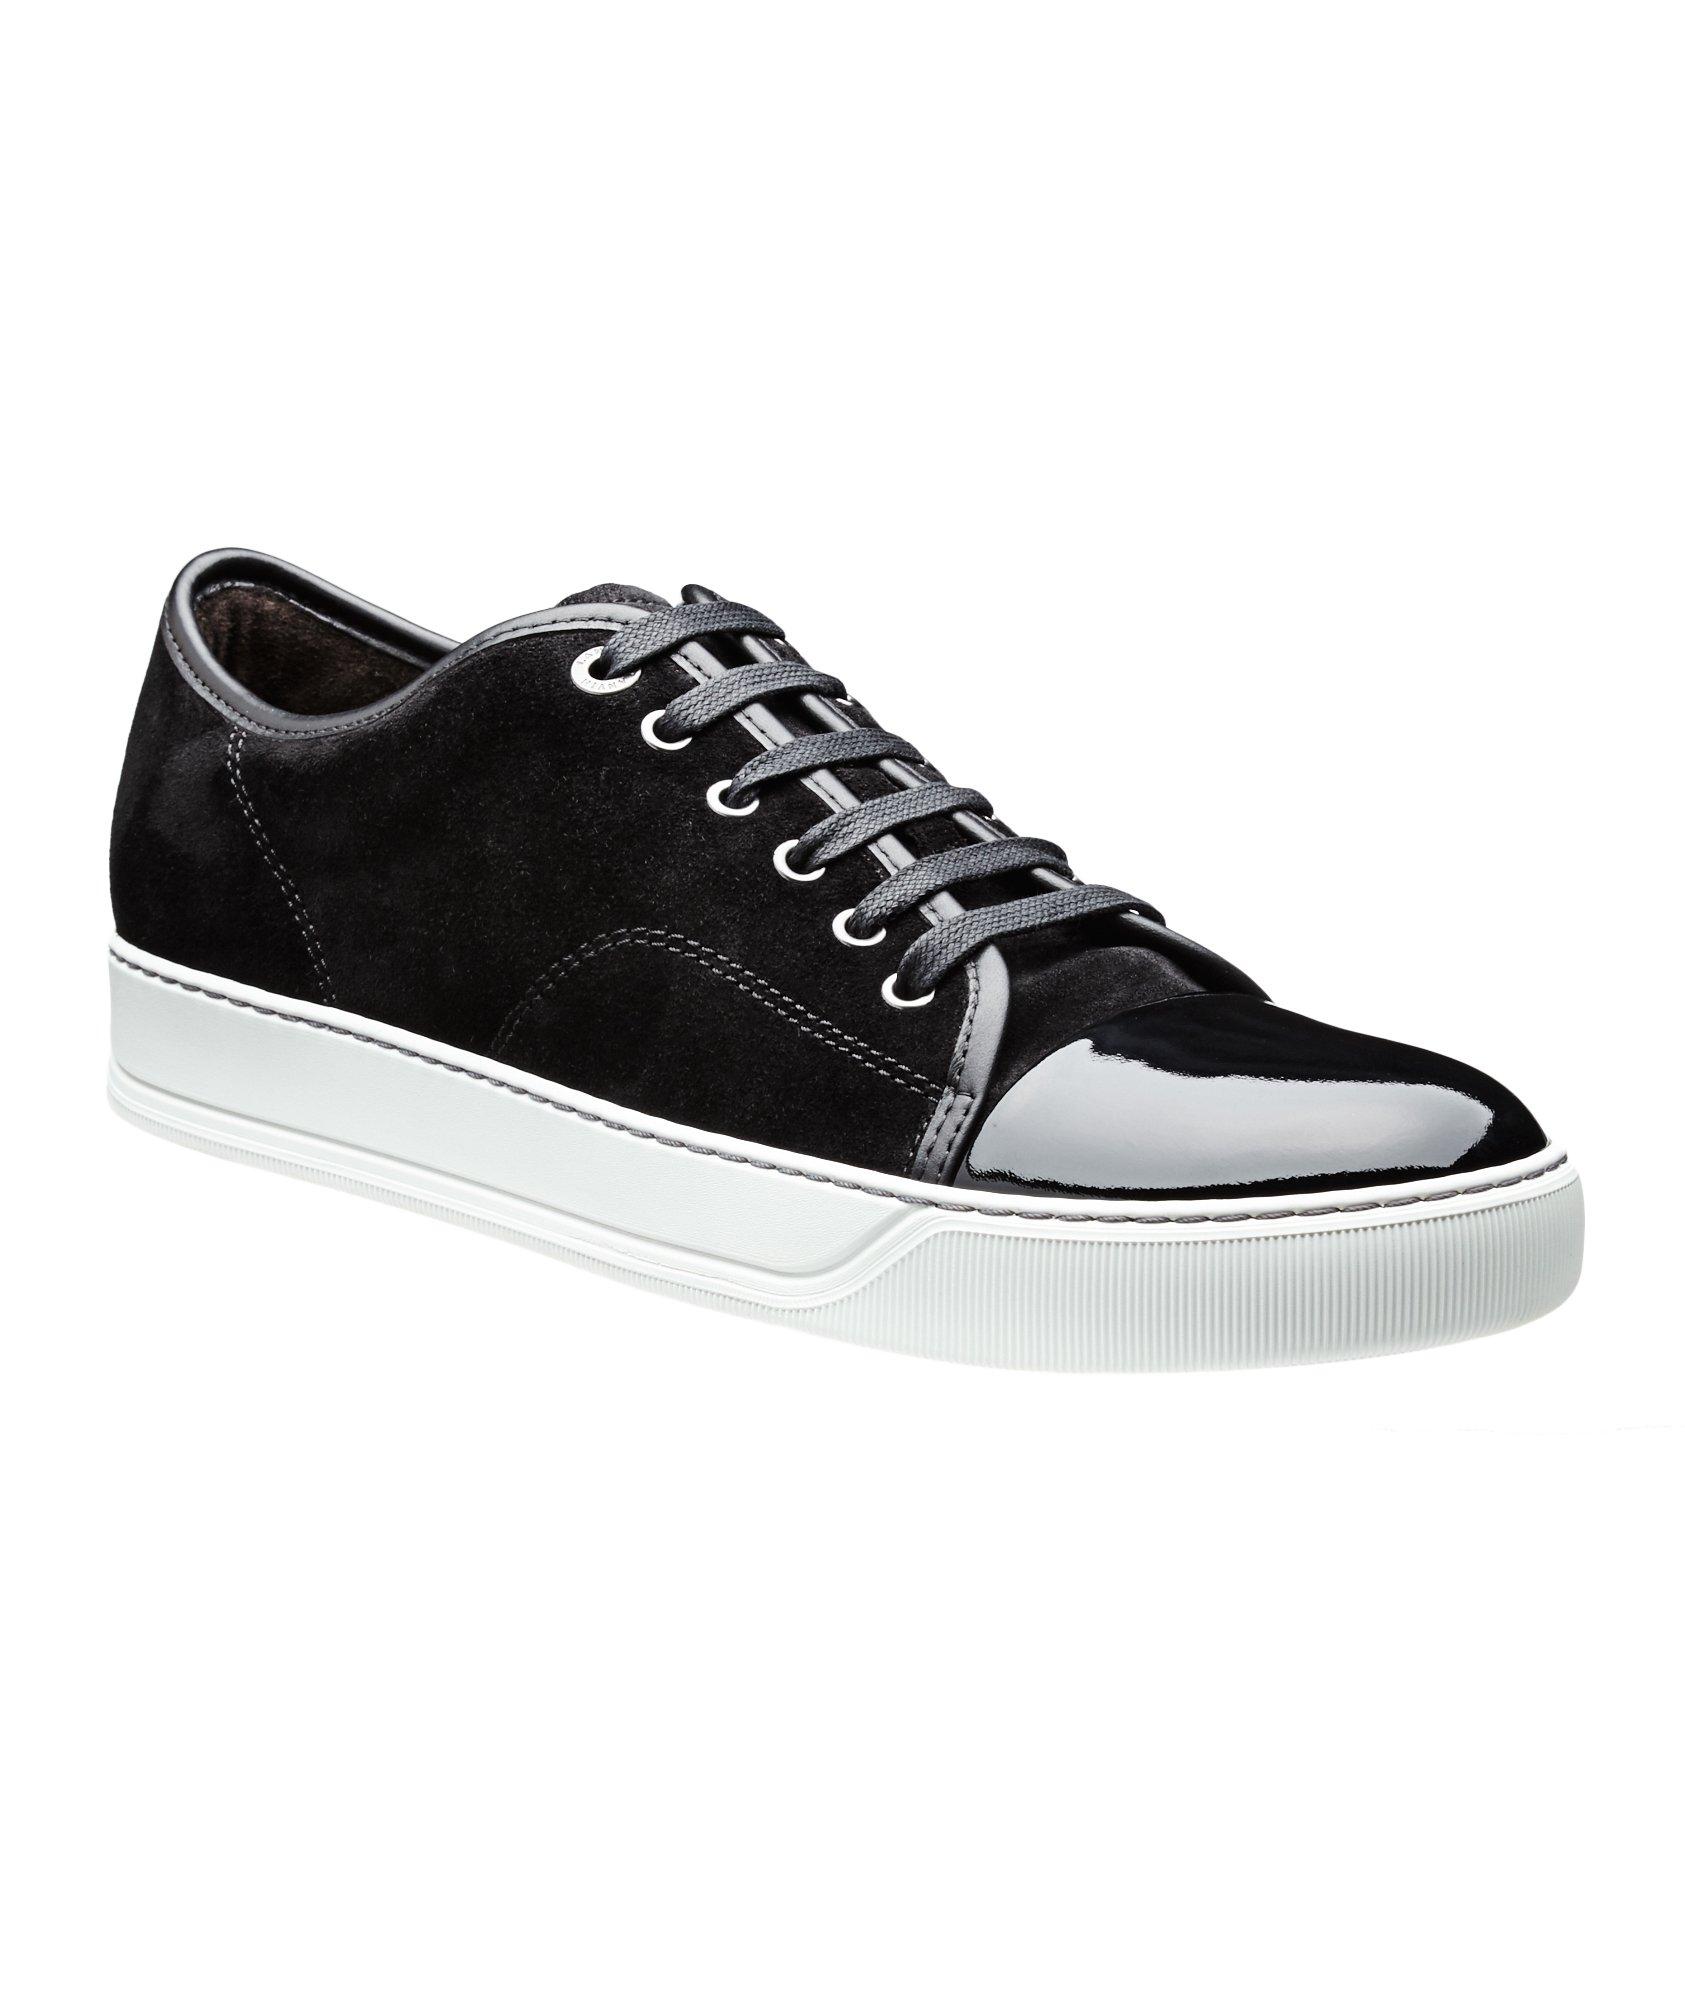 Suede & Patent Leather Low-Tops image 0